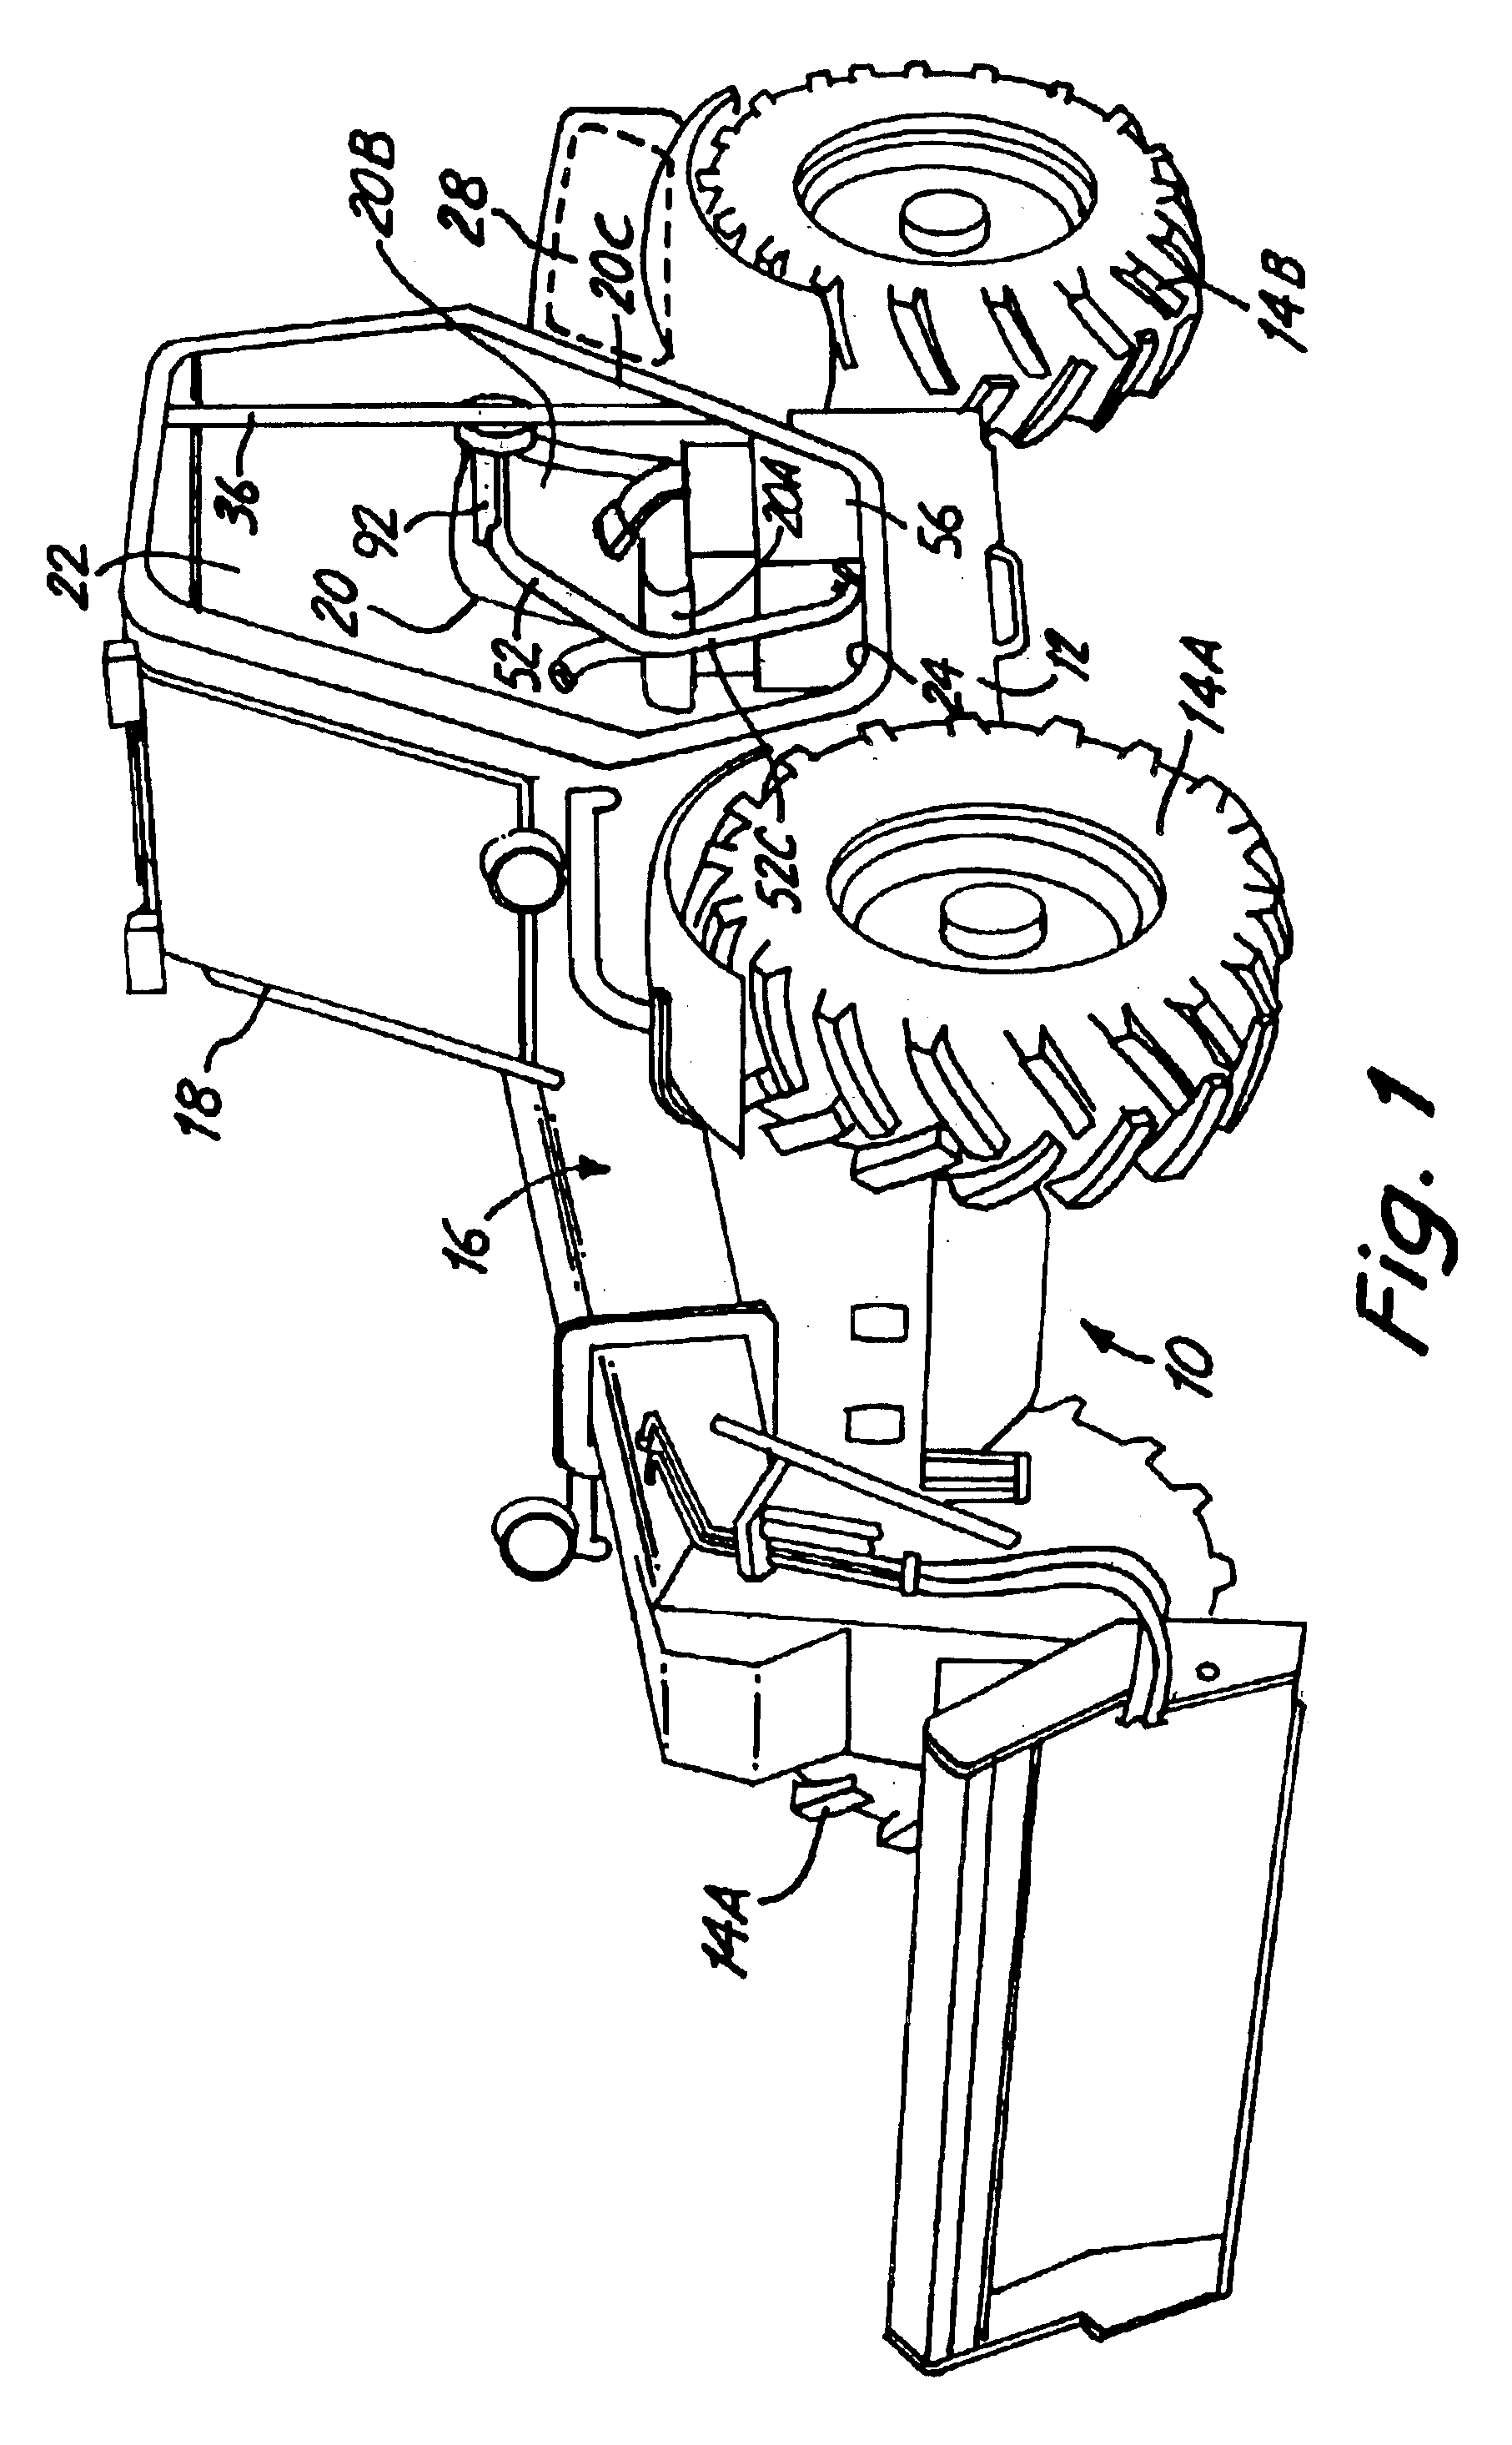 Lateral operator restraint system and position sensor for material handler